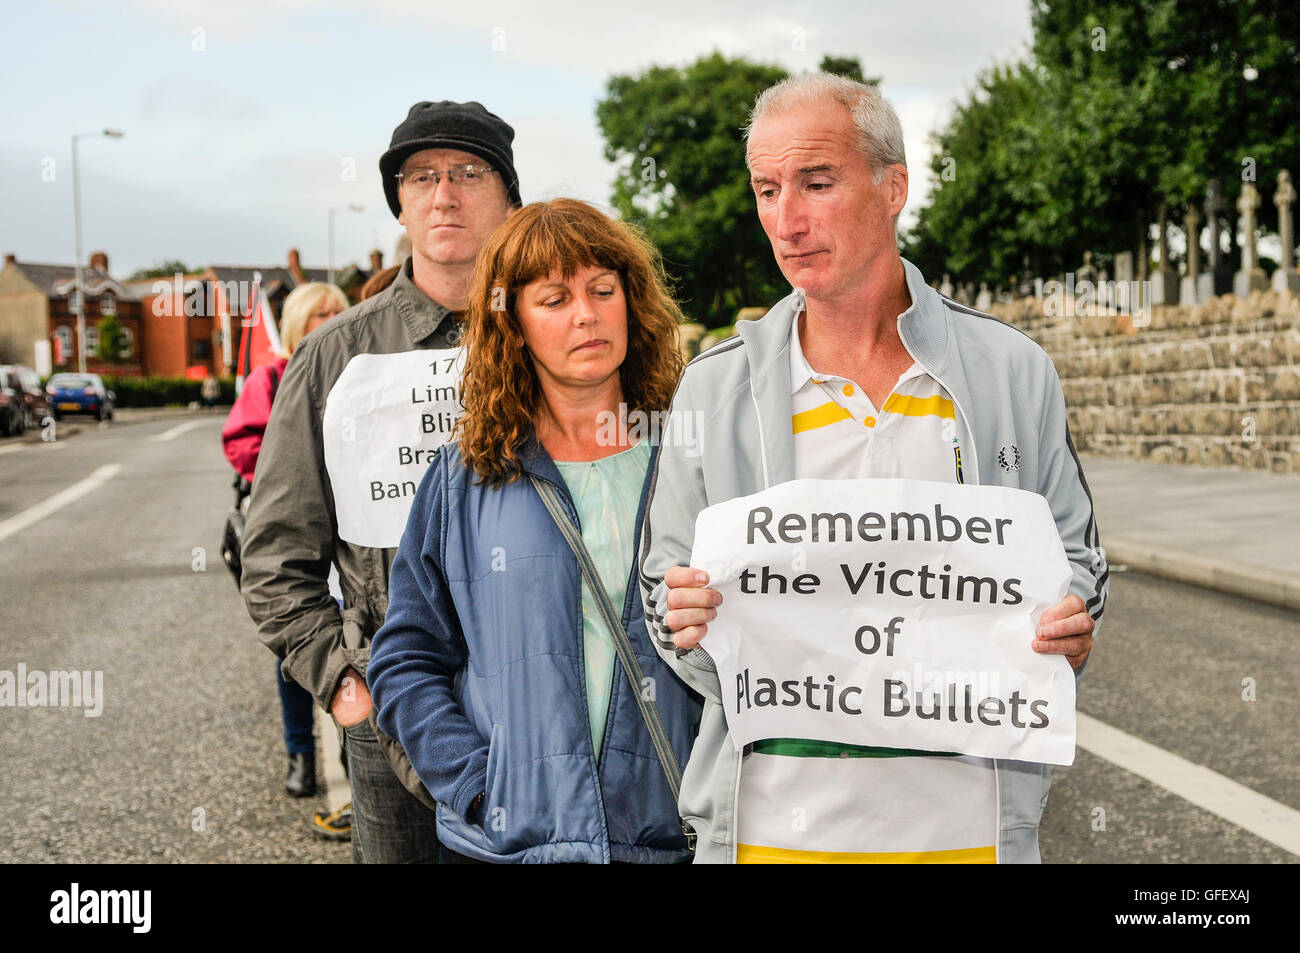 Belfast, Northern Ireland. 6 Aug 2014 - Protesters hold a white-line protest to remember the victims of plastic bullets, killed by British Army and RUC during the troubles. Stock Photo